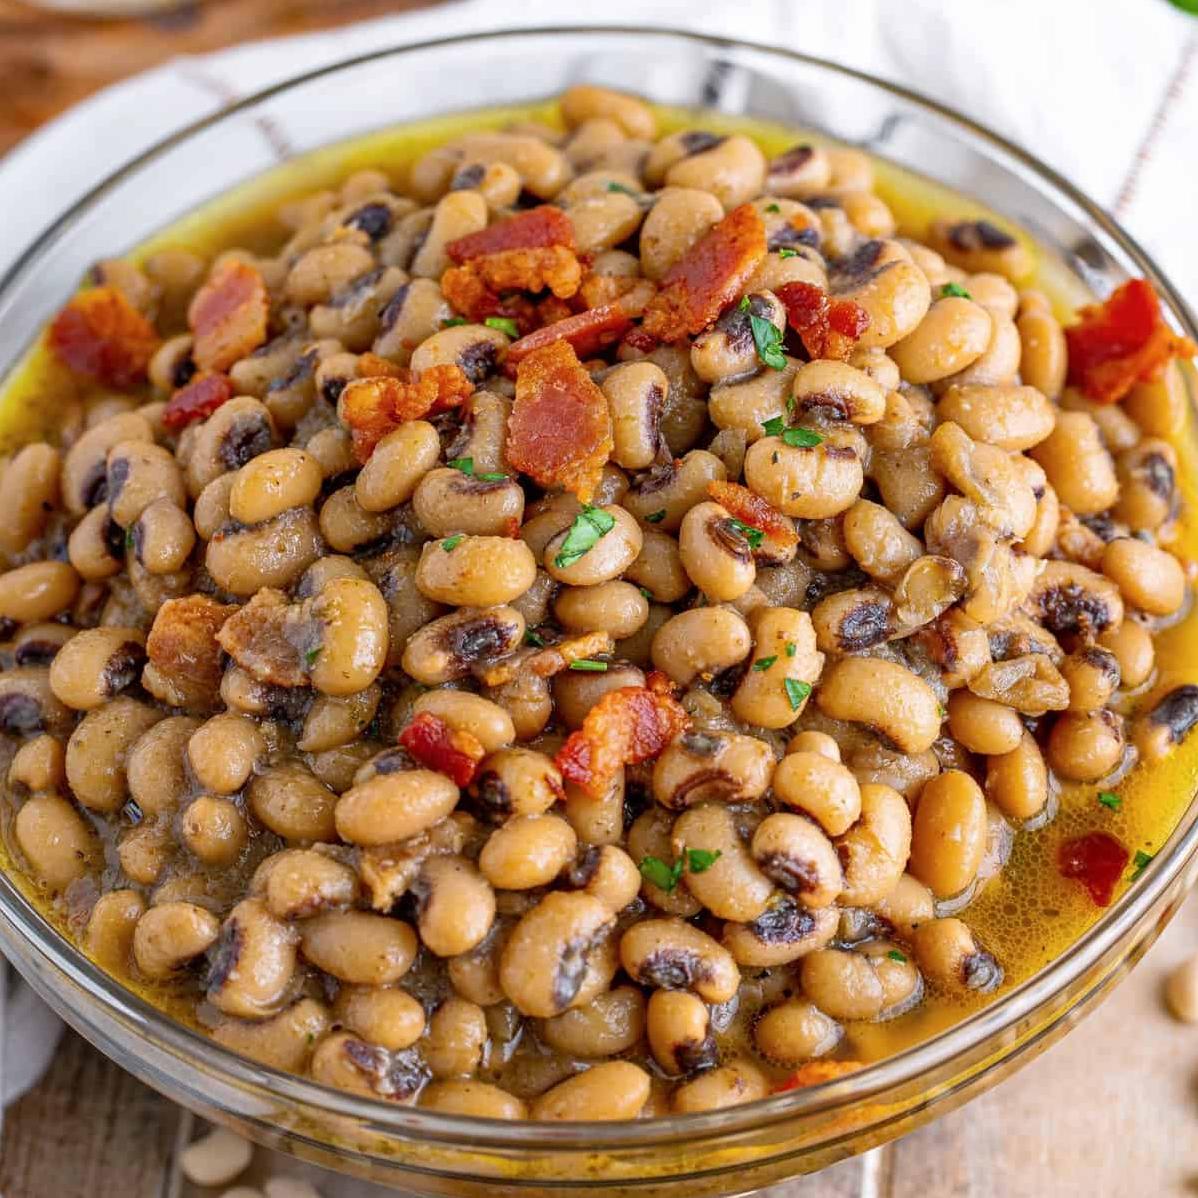  A bowl of steaming hot Southern Black-Eyed Peas is comfort food at its finest.